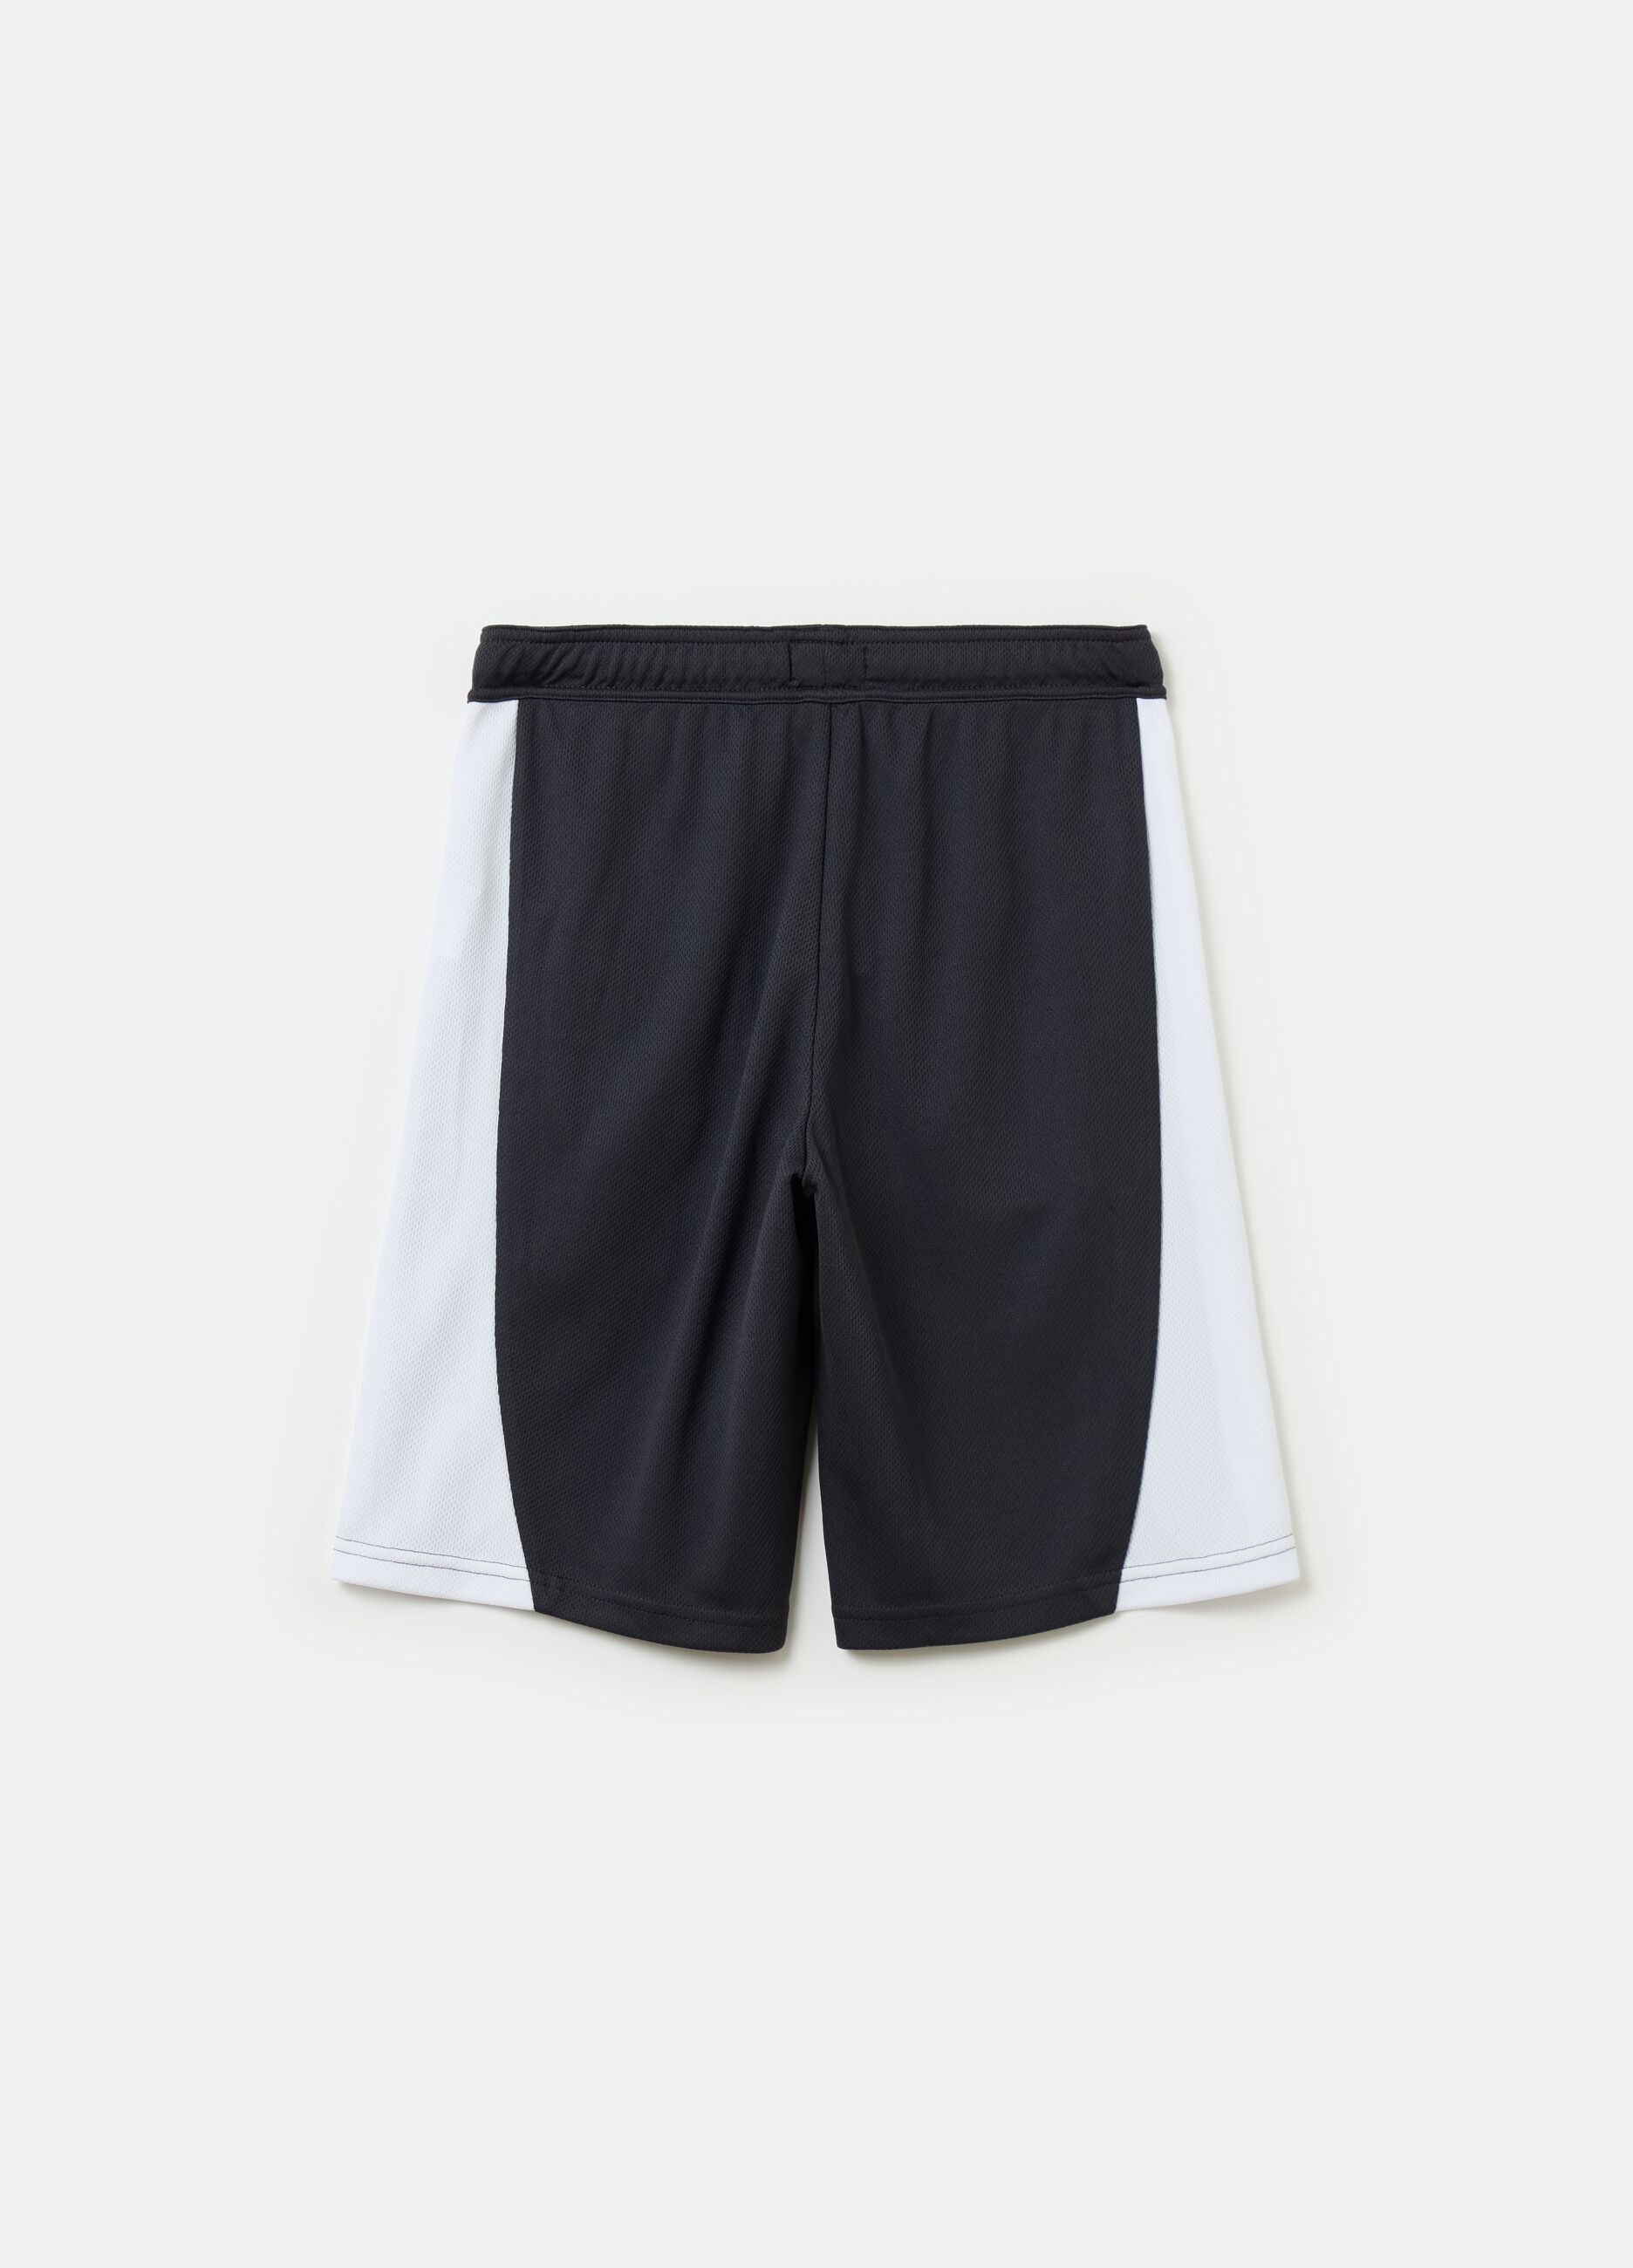 Mesh Bermuda shorts with contrasting bands